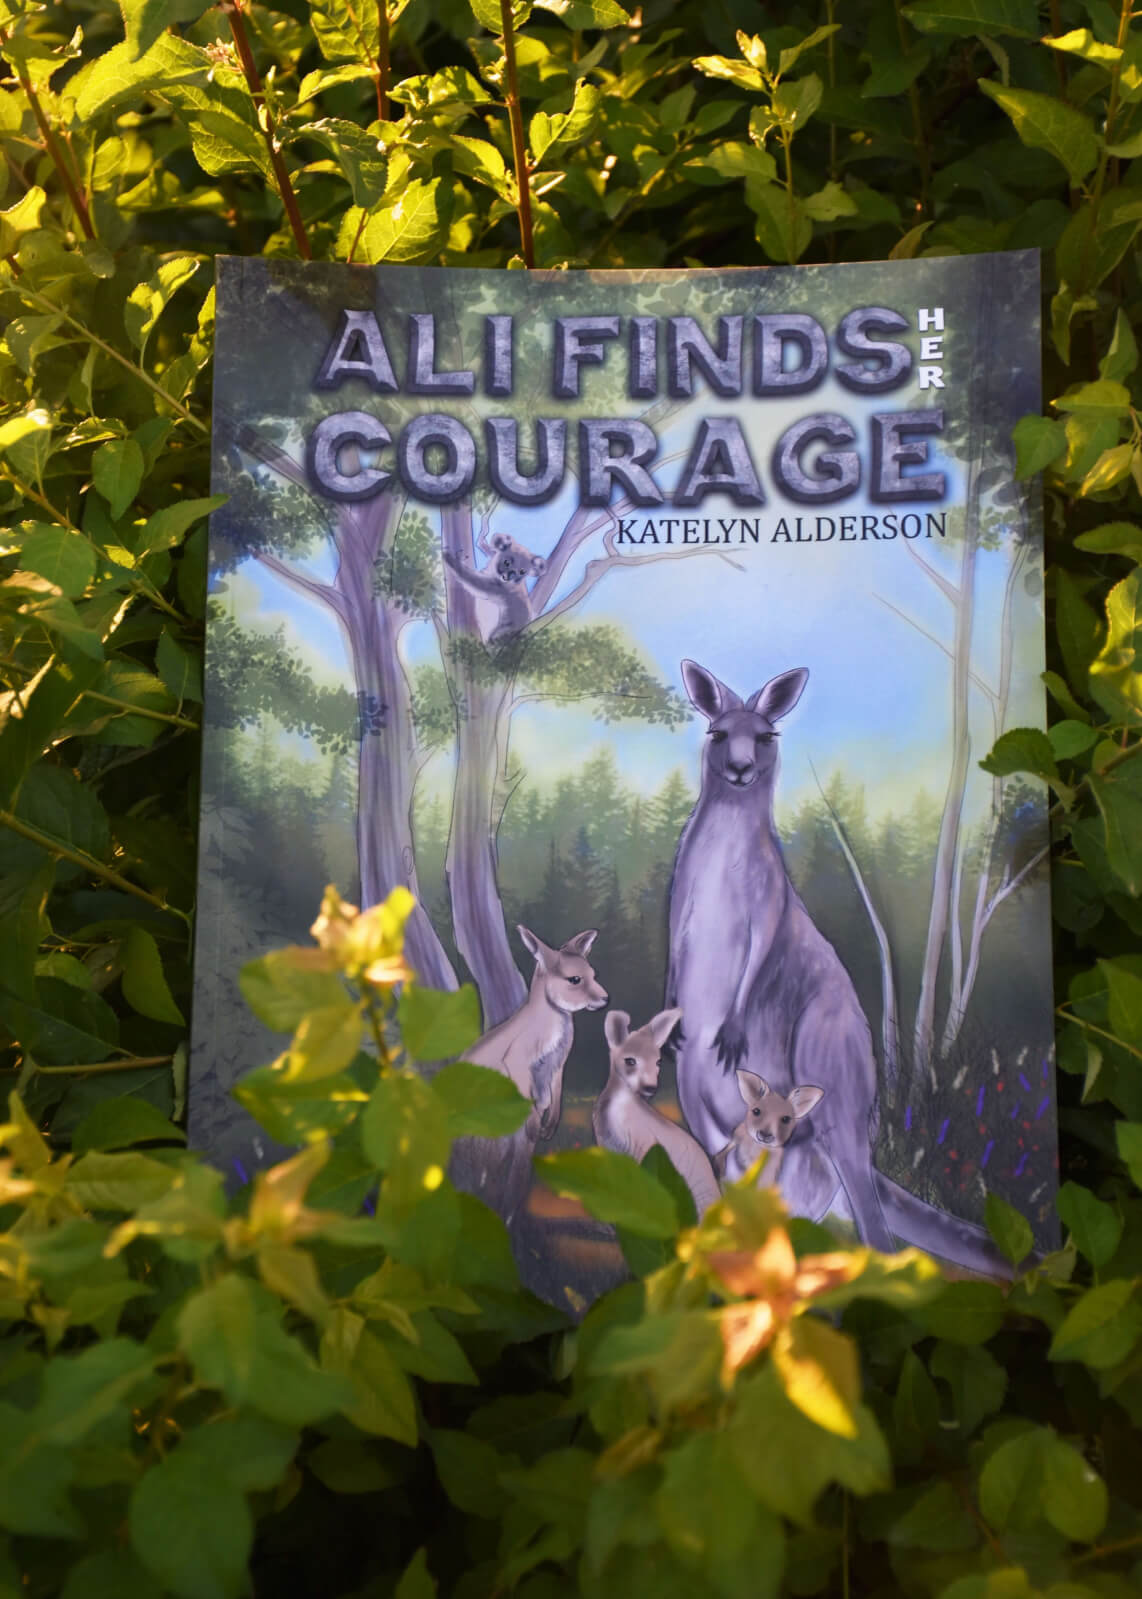 The book 'Ali Finds Her Courage' by Katelyn is lying among the green leaves of a tree.